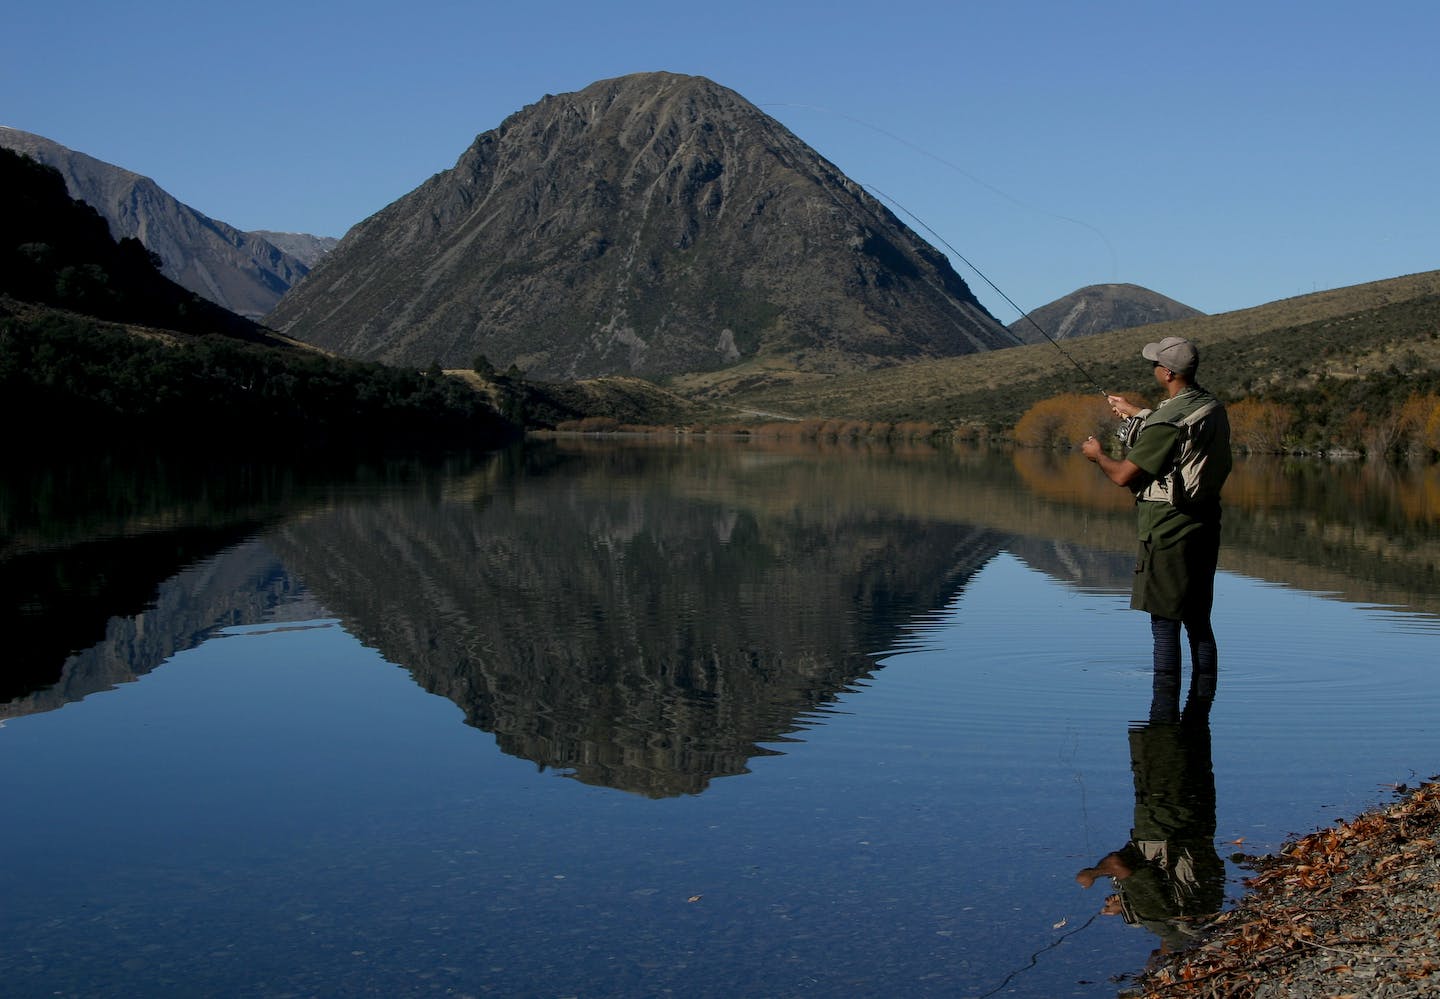 A man fly fishes on a lake in NZ that is still and perfectly reflects the surrounding hills.